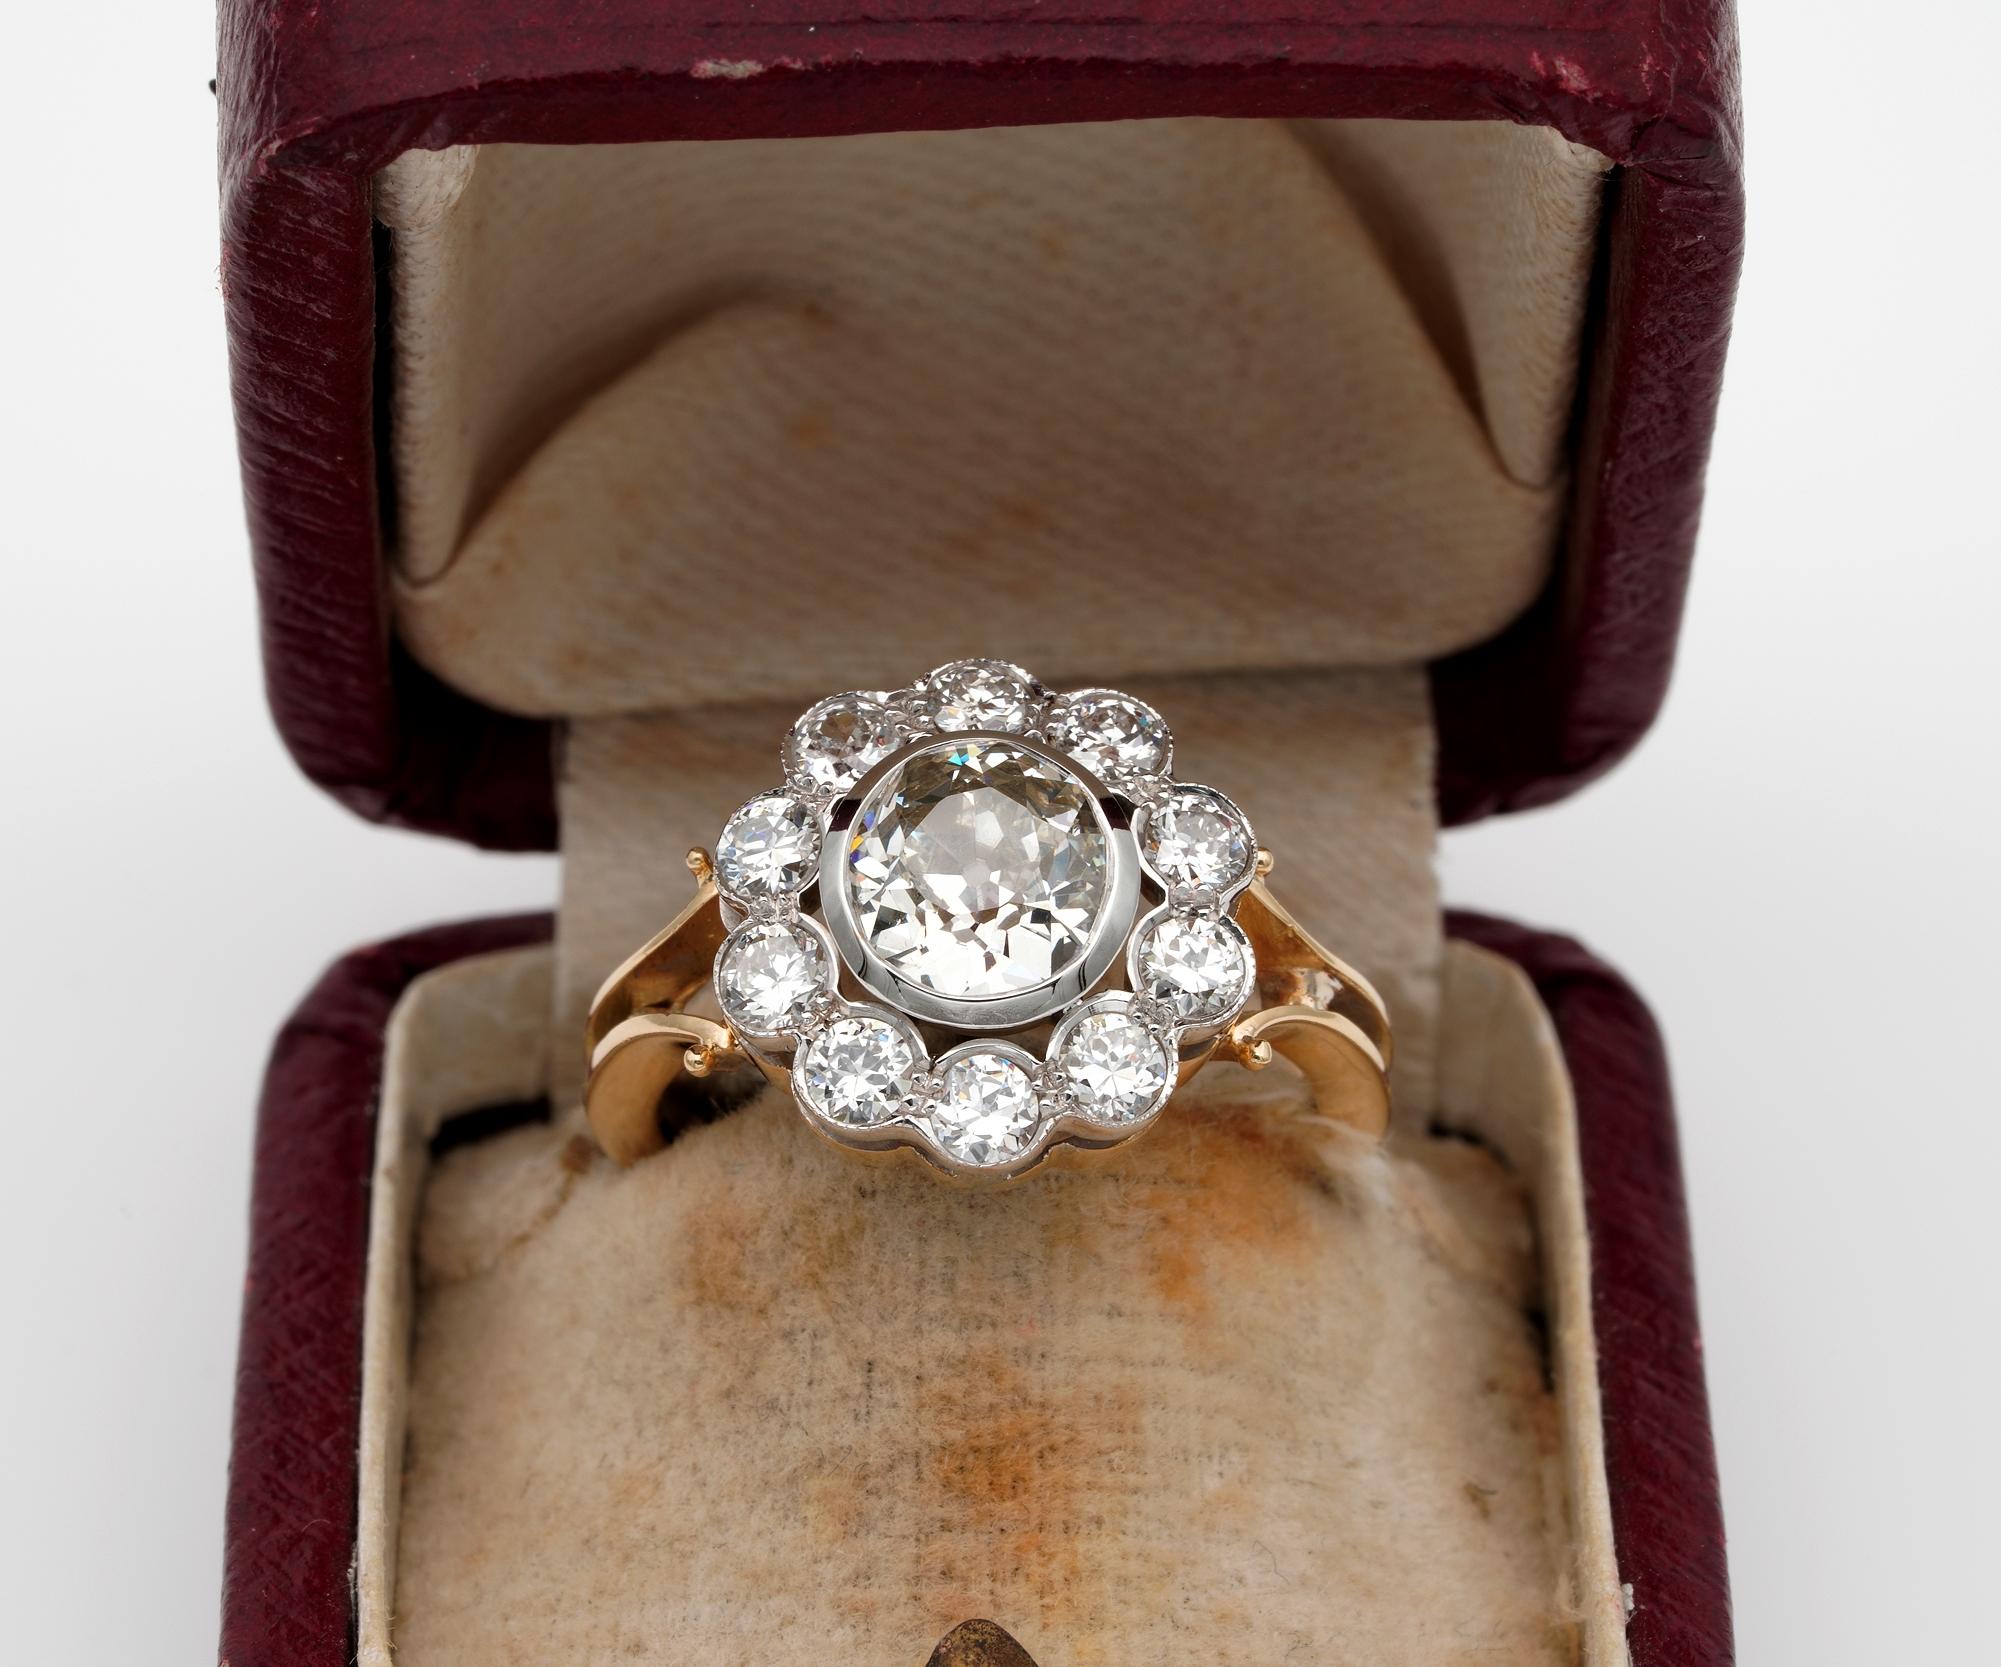 For ever with me

An outstanding early Art Deco Diamond cluster ring, fine example suitable either for engagement, anniversary or simply as favourite every day Diamond cluster ring
Solidly constructed of 18 KT gold with Platinum top
Round and most